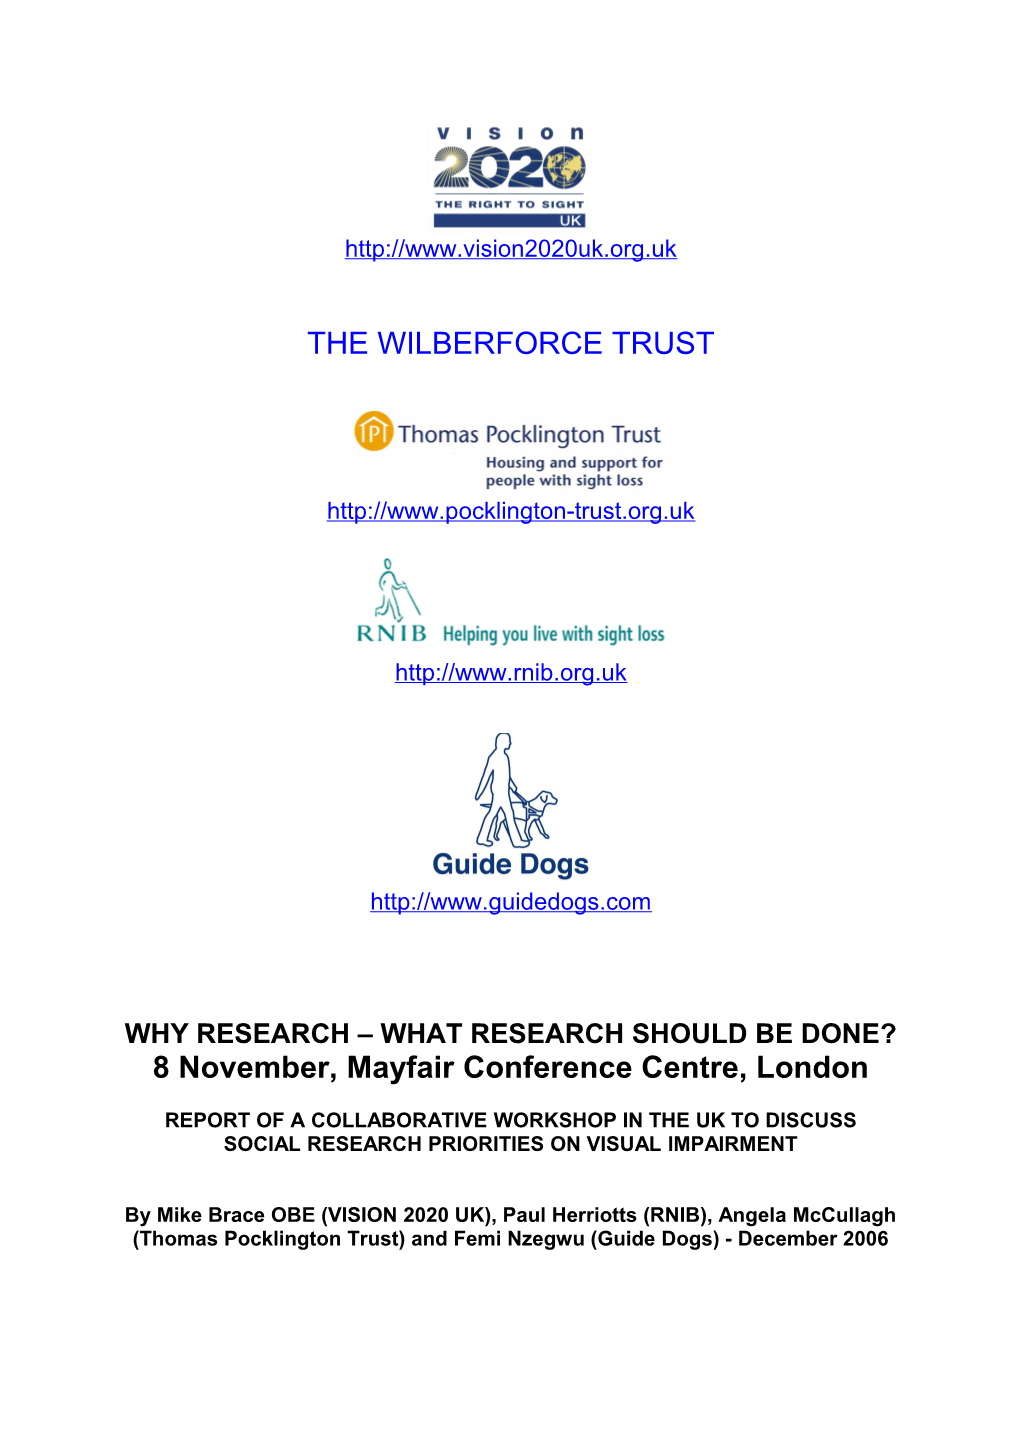 Notes from Sector Research Workshop 8 Nov